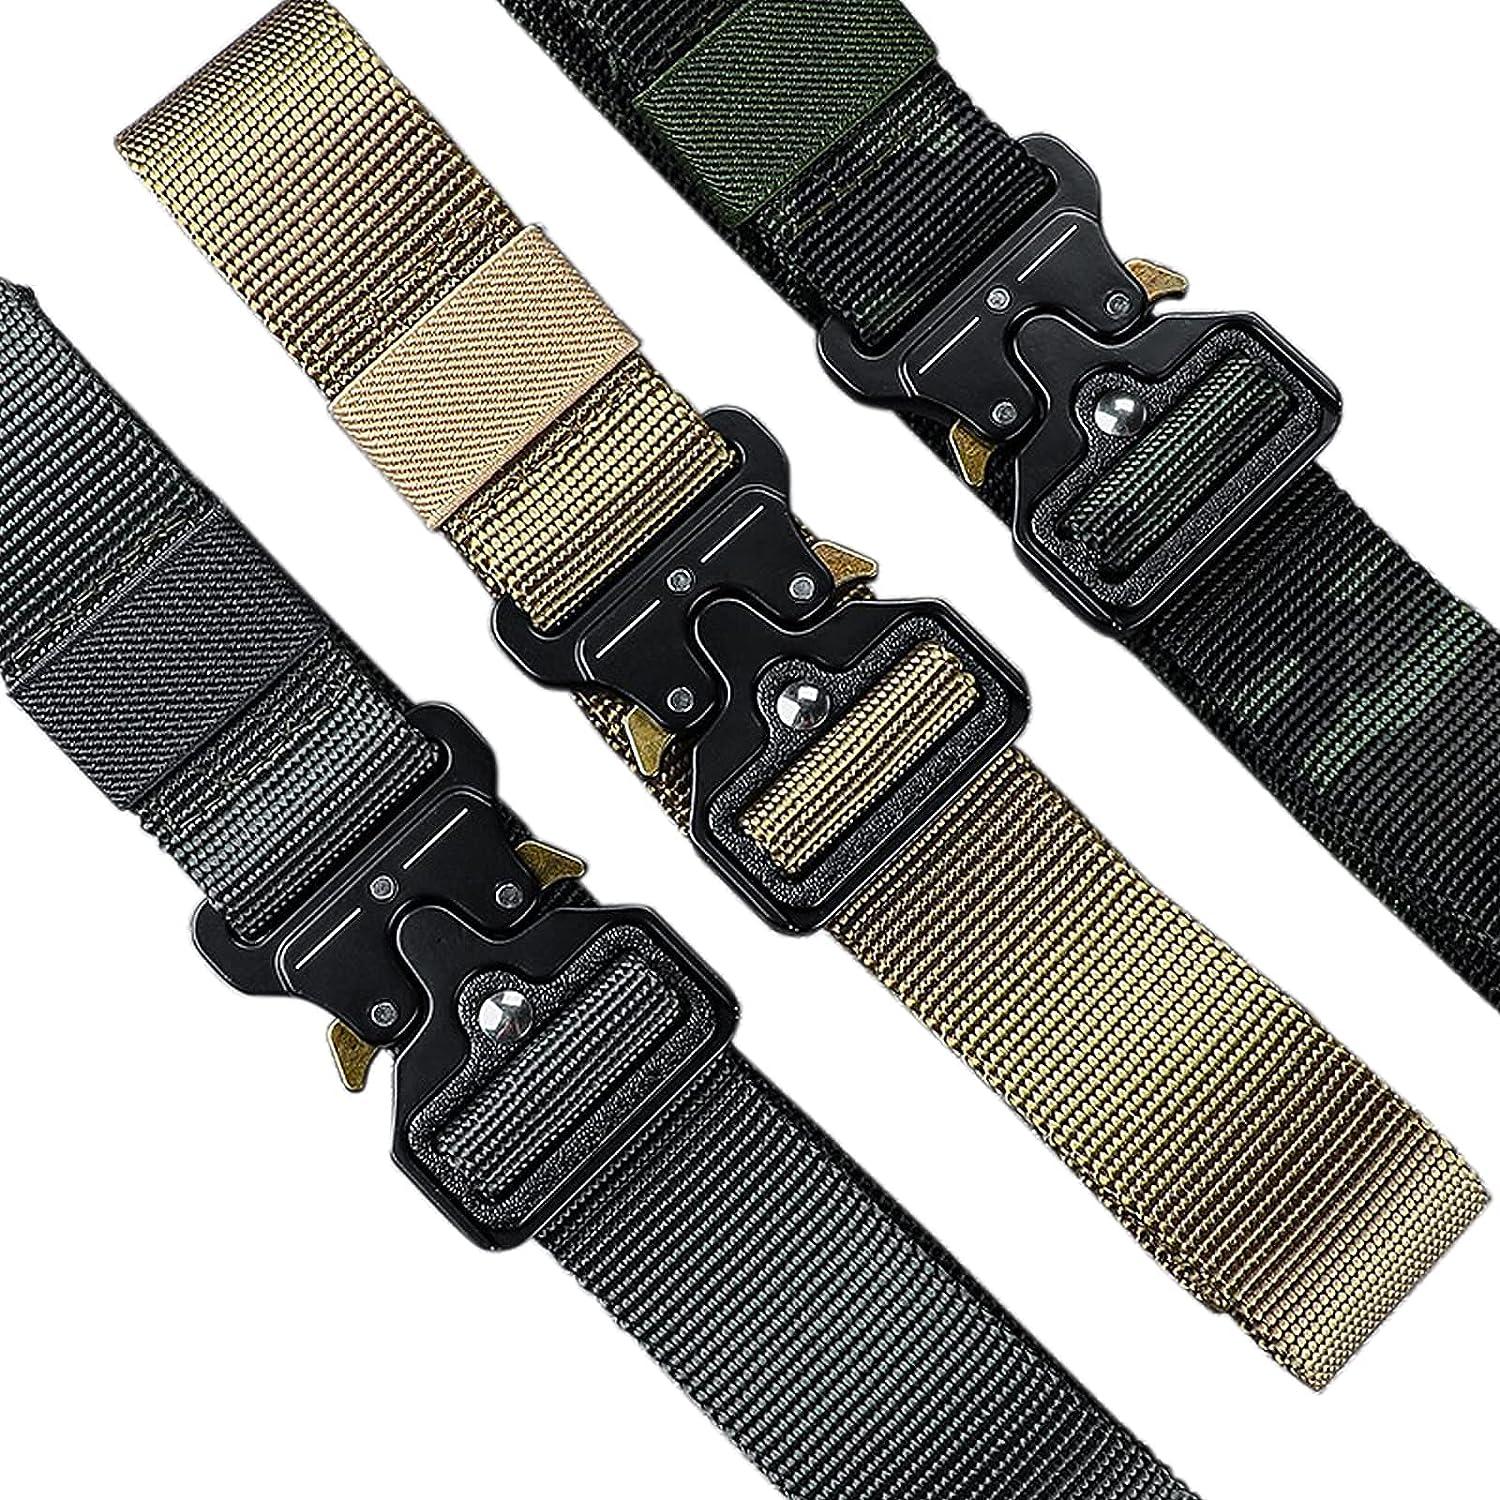 TXZWJZ Metal Buckle Tactical Belt Heavy-Duty – 1in 2 pack Quick Release  Buckle for Buckle Replacement